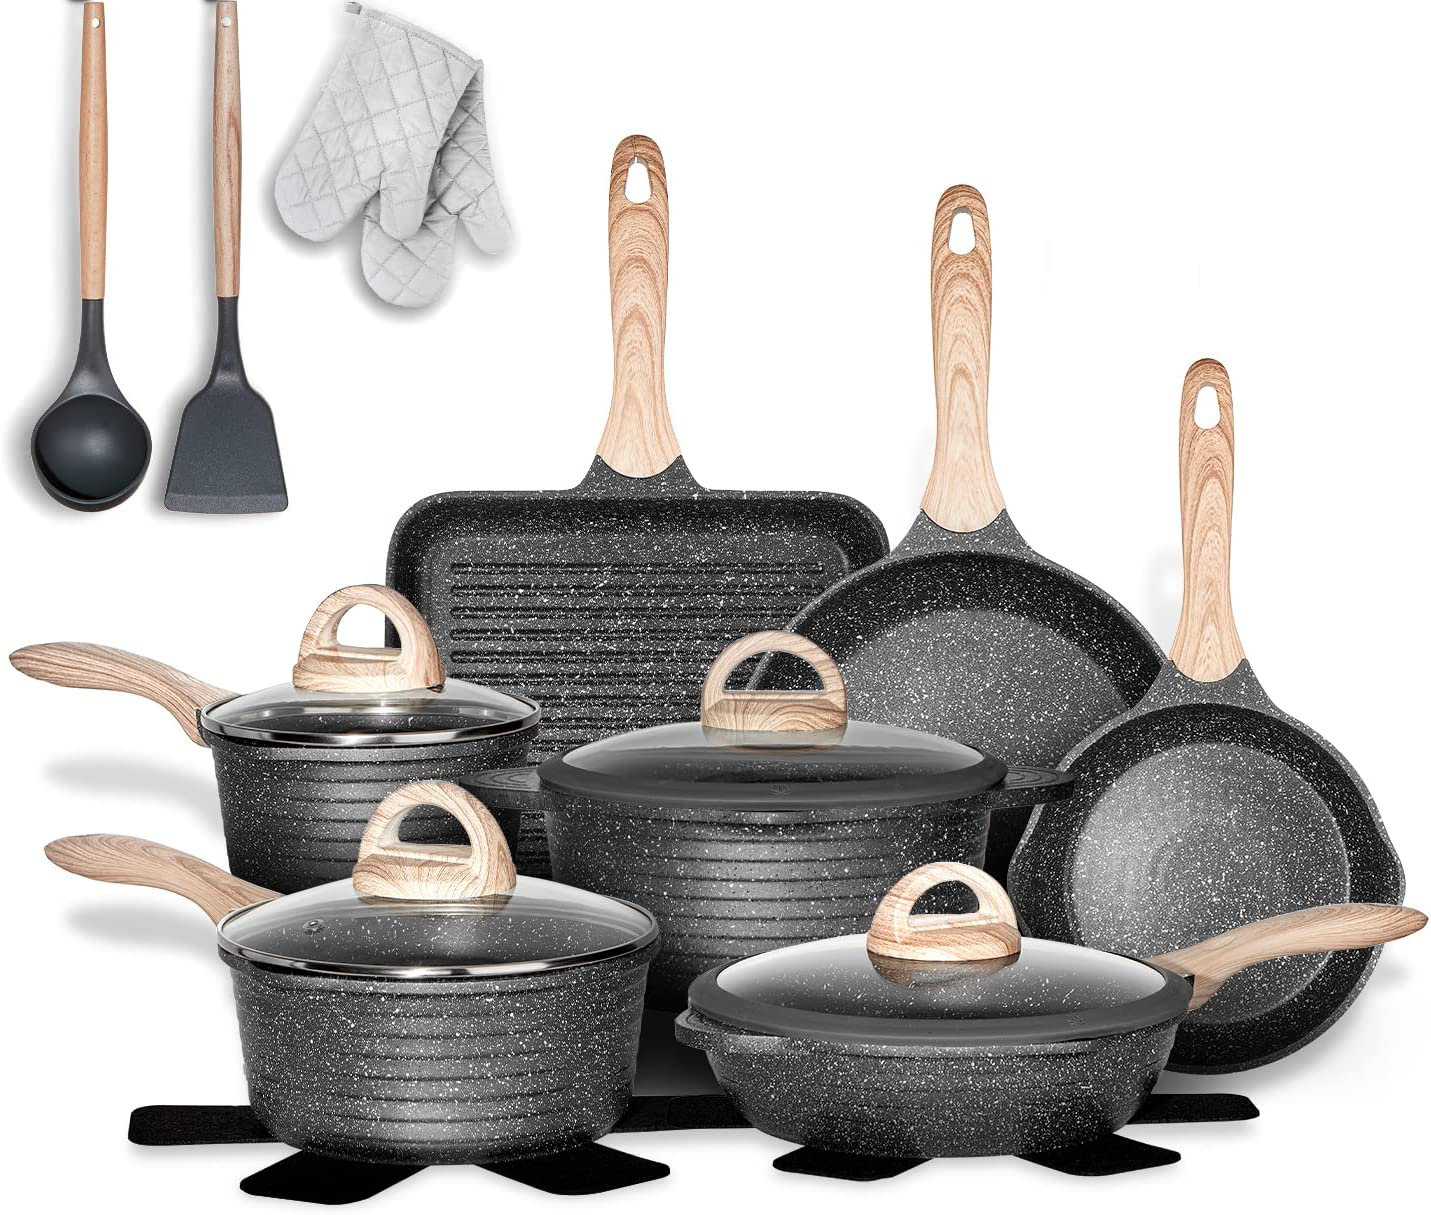 Pots and Pans Set - Caannasweis Kitchen Nonstick Cookware Sets Granite  Frying Pans for Cooking Marble Stone Pan Sets Kitchen Essentials Set (Grill  Pan